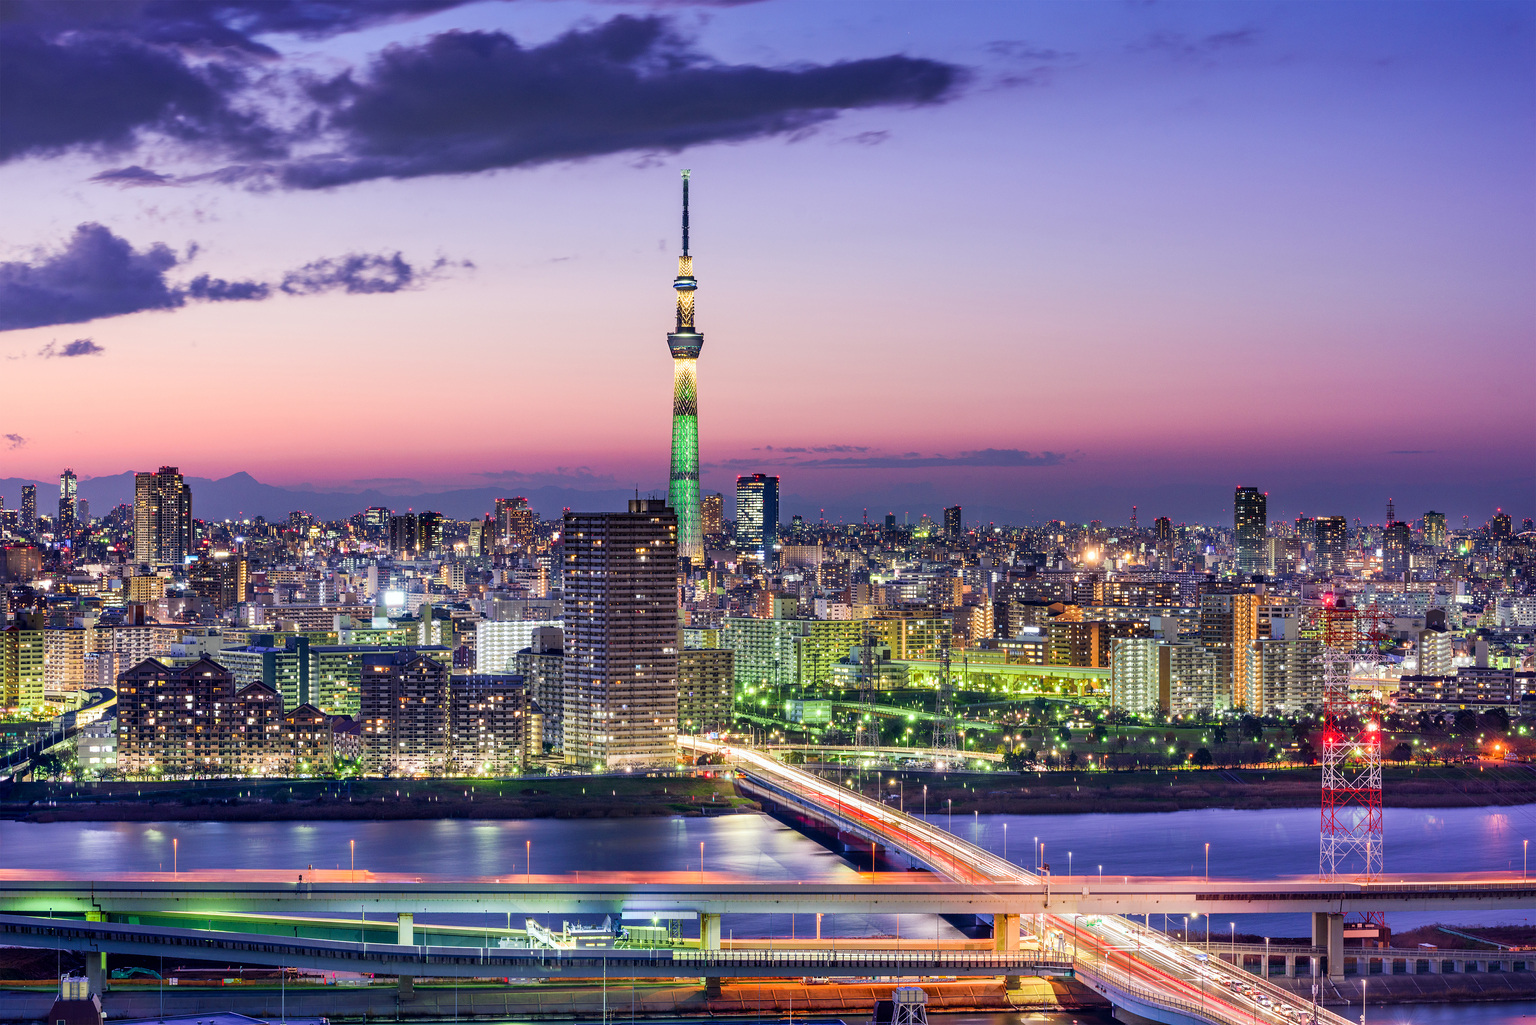 PhotoCosmos: The biggest city in the world , Tokyo - Japan